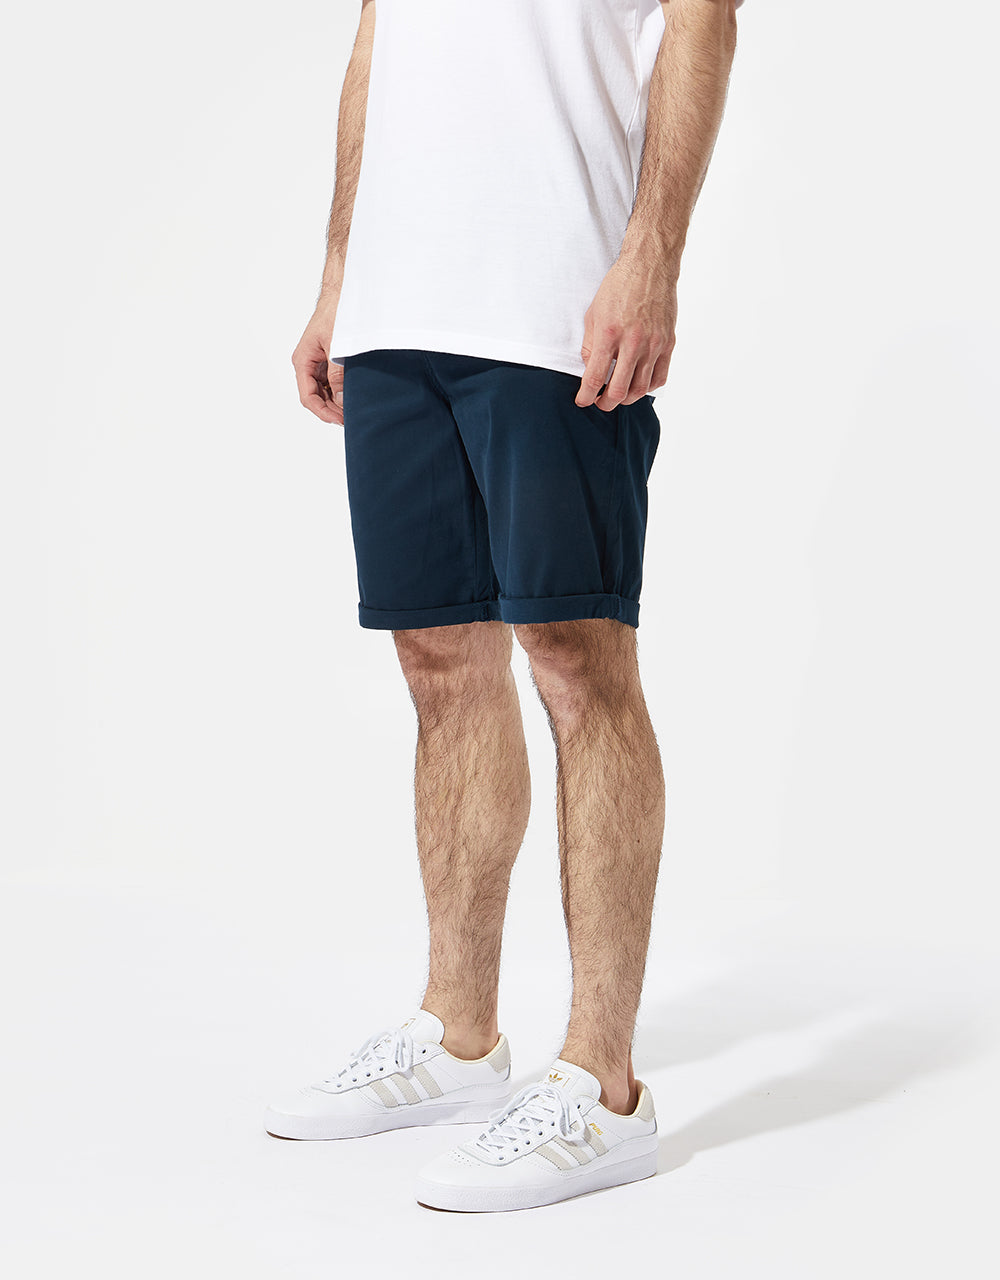 Route One Roll Up Chino Shorts - Navy